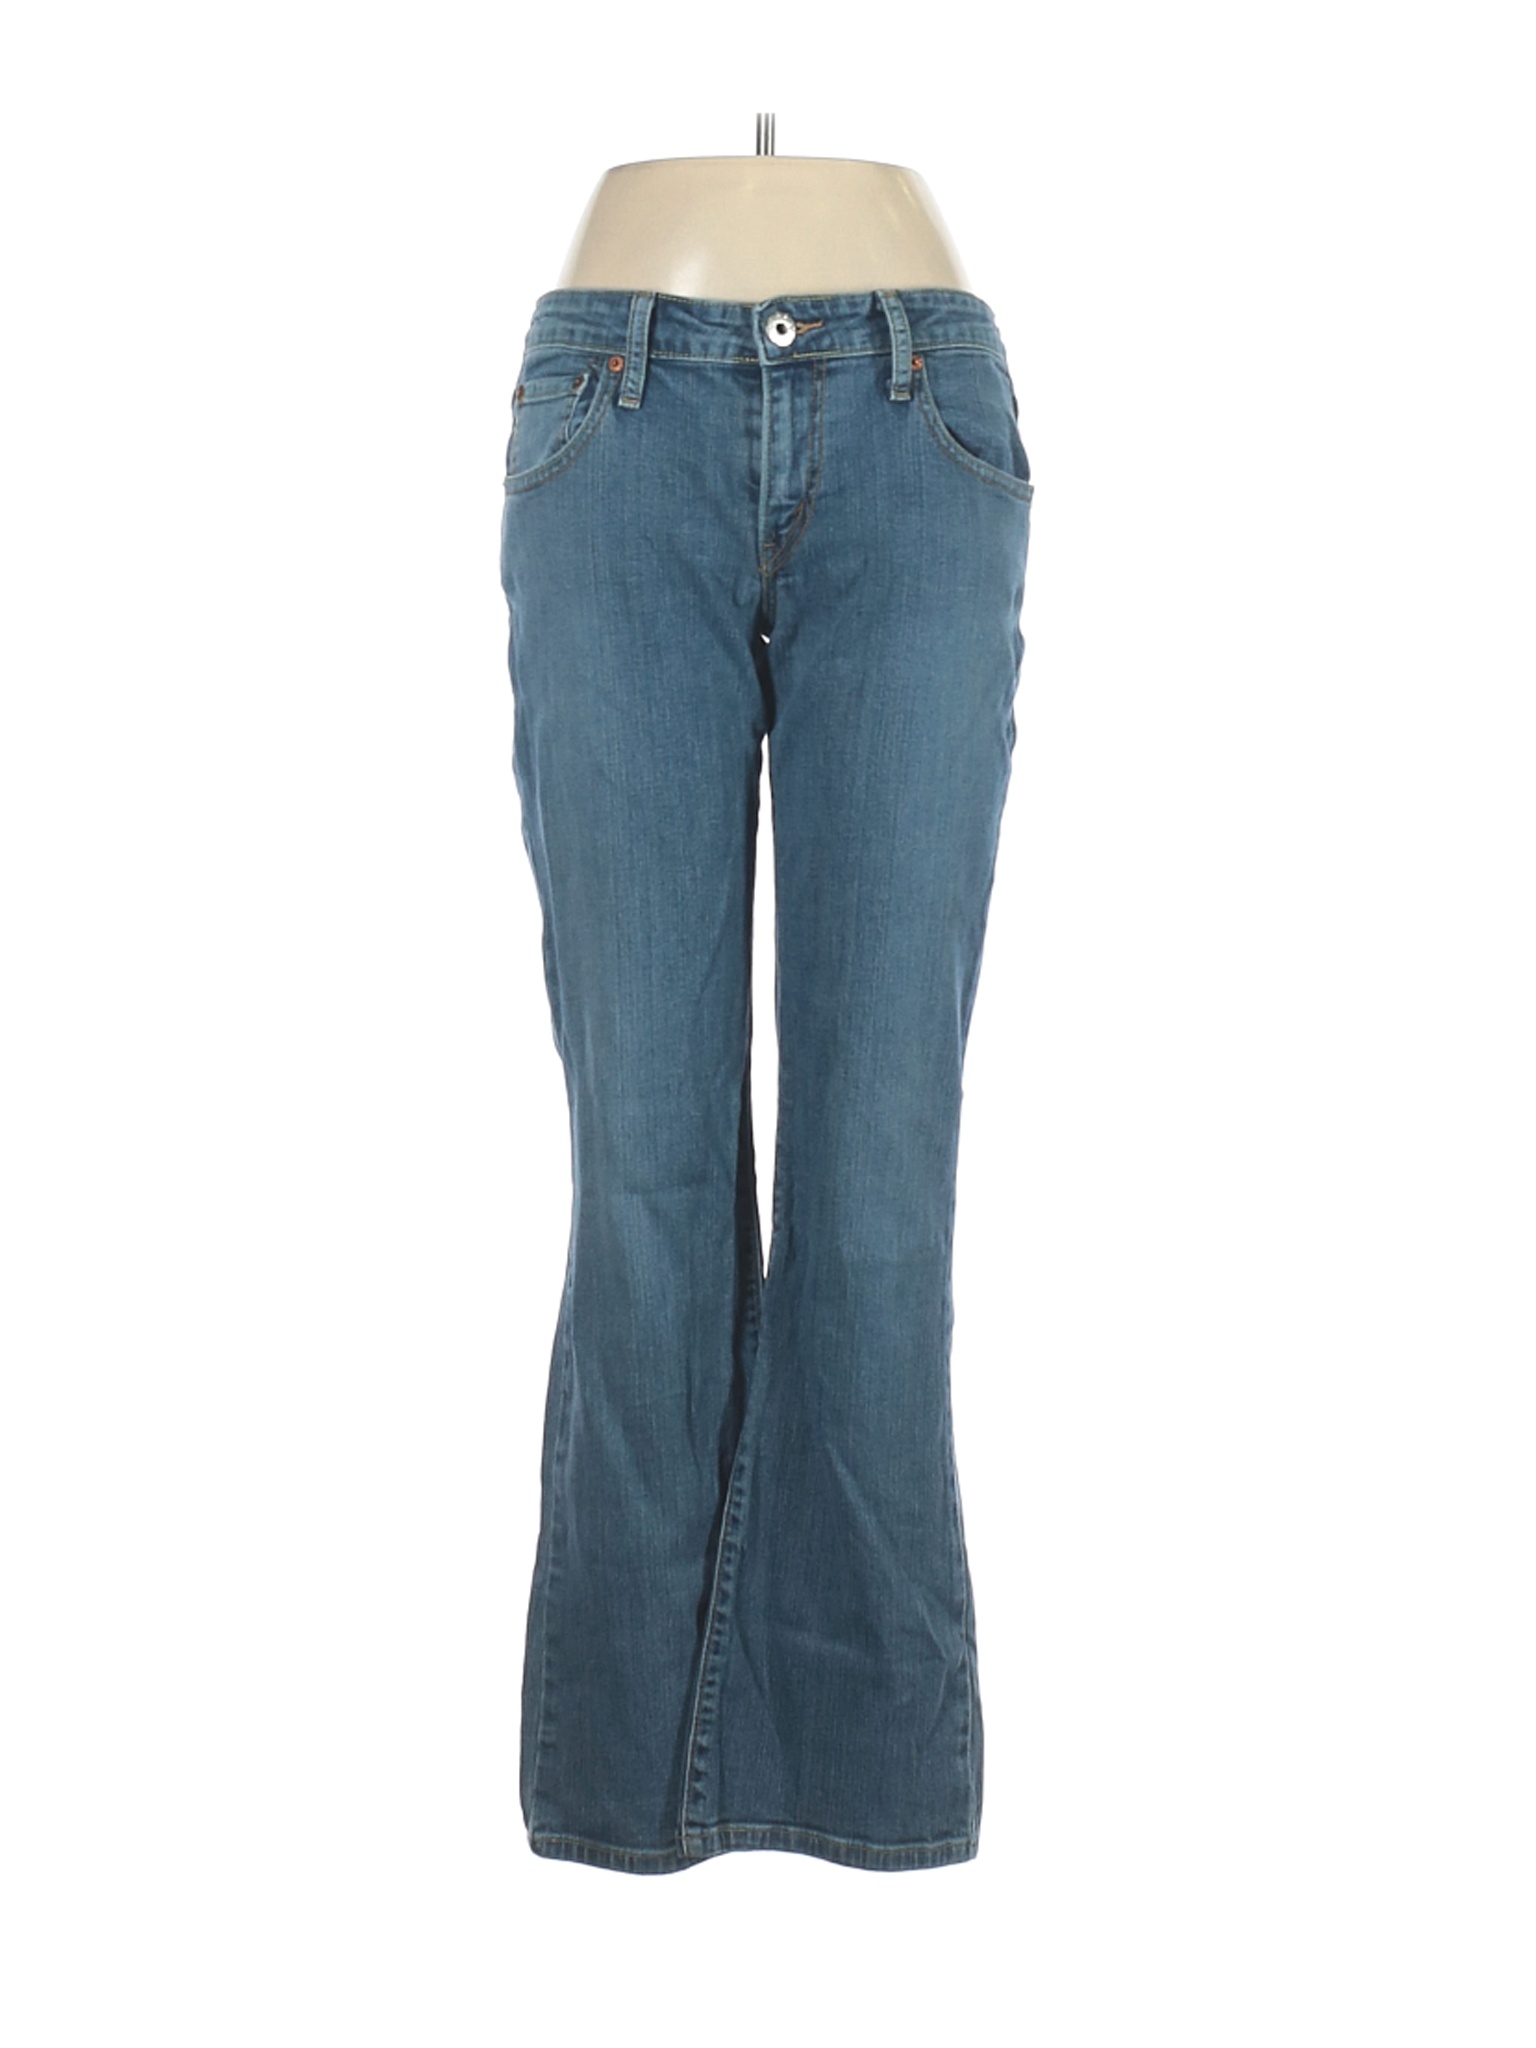 Buy Pre-Owned Levis Womens Size 9 Jeans Online at Lowest Price in Ubuy  Nigeria. 217158890